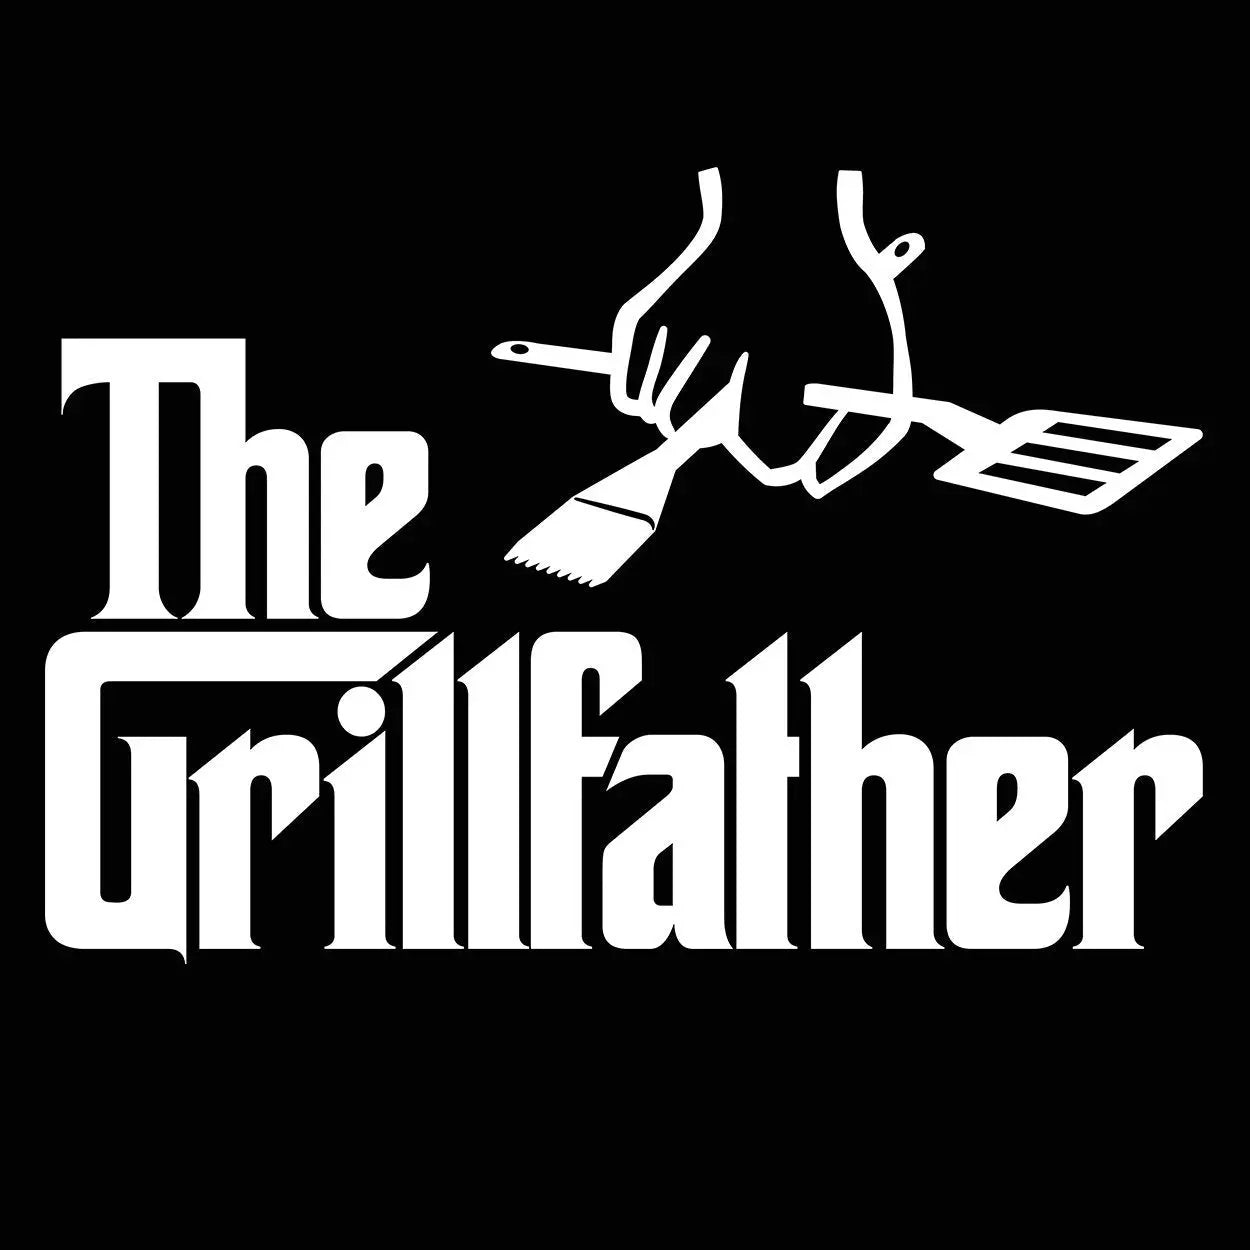 The Grill Father Tshirt - Donkey Tees